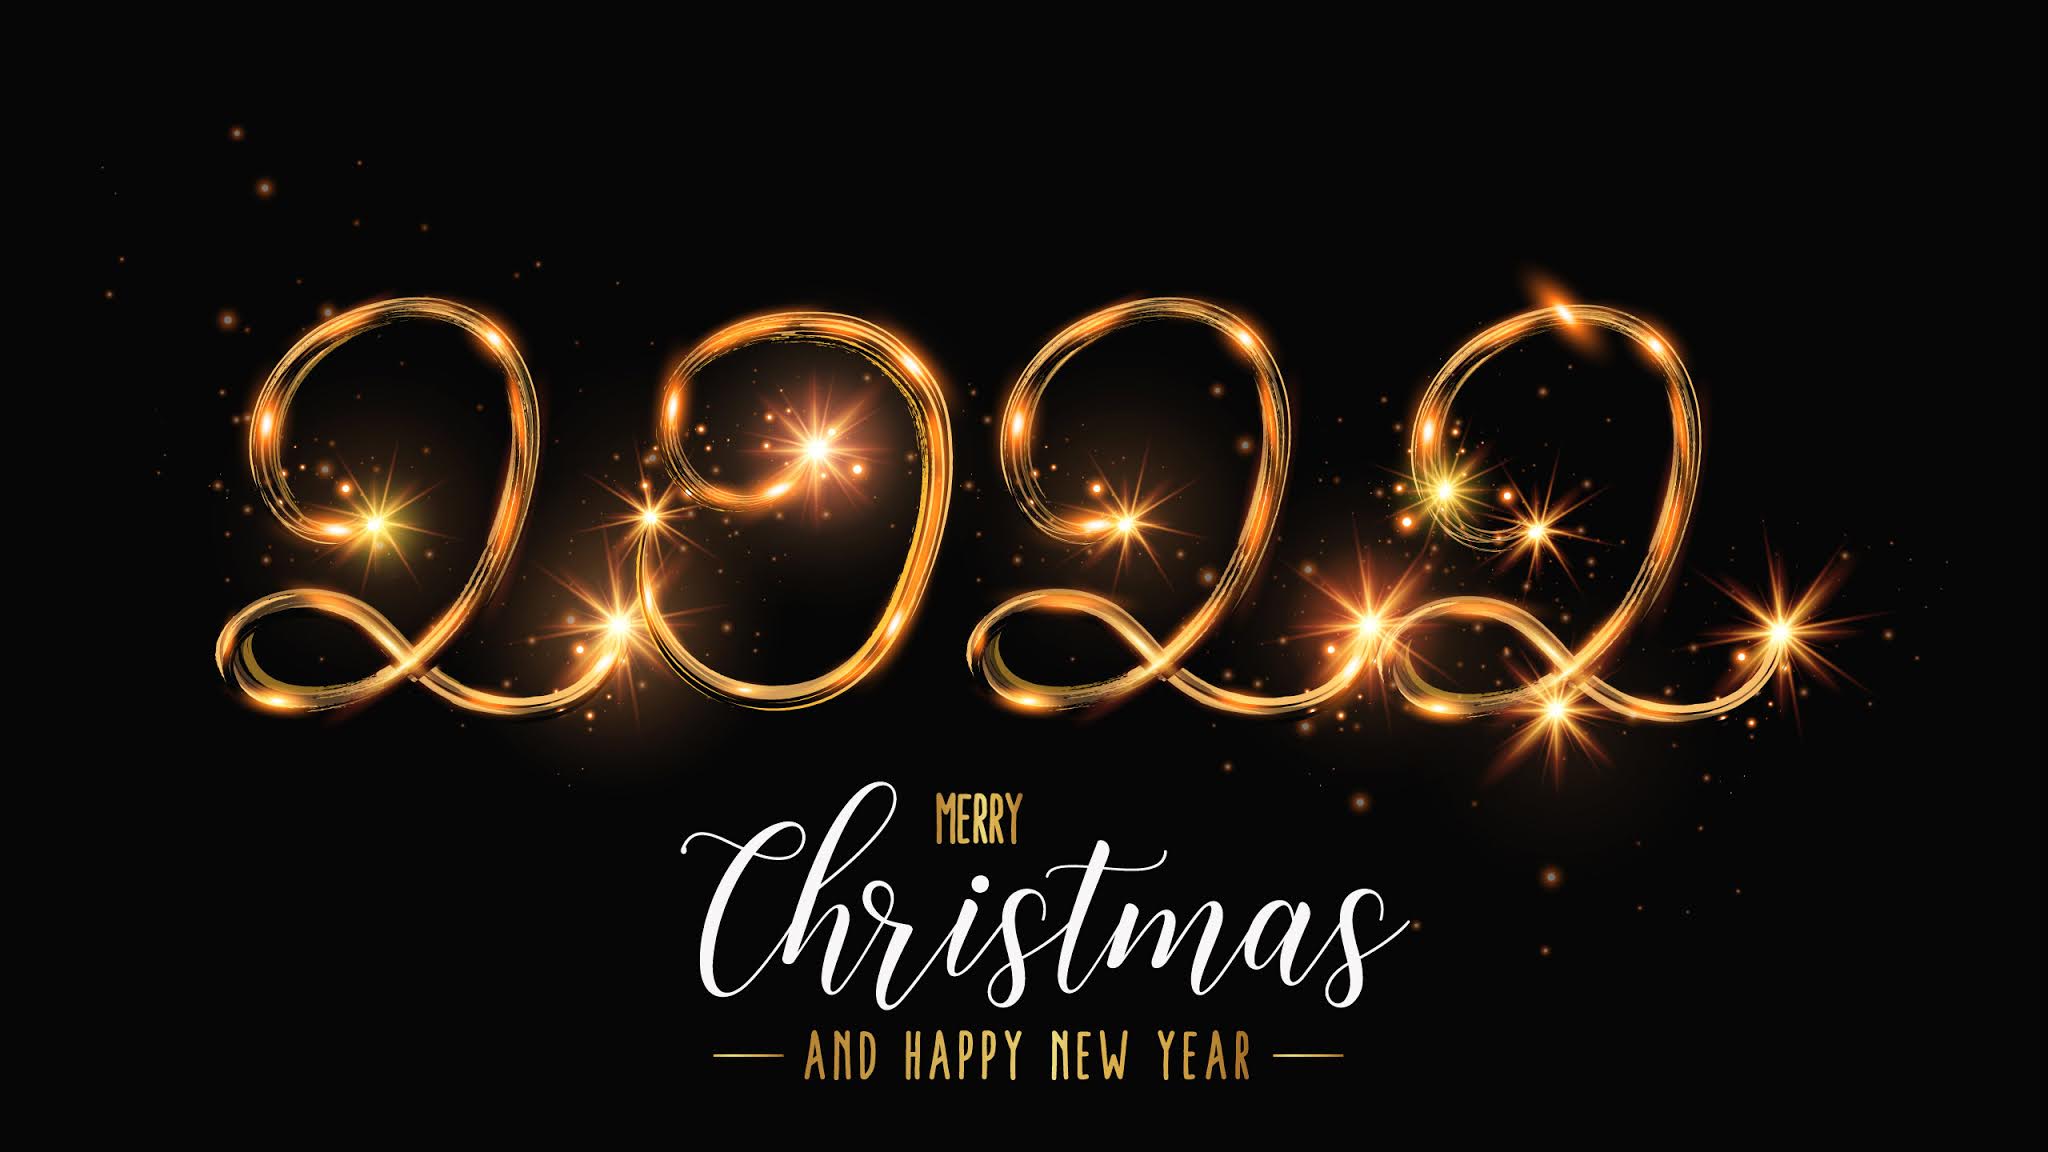 2022 Merry Christmas And Happy New Year iPhone Wallpapers